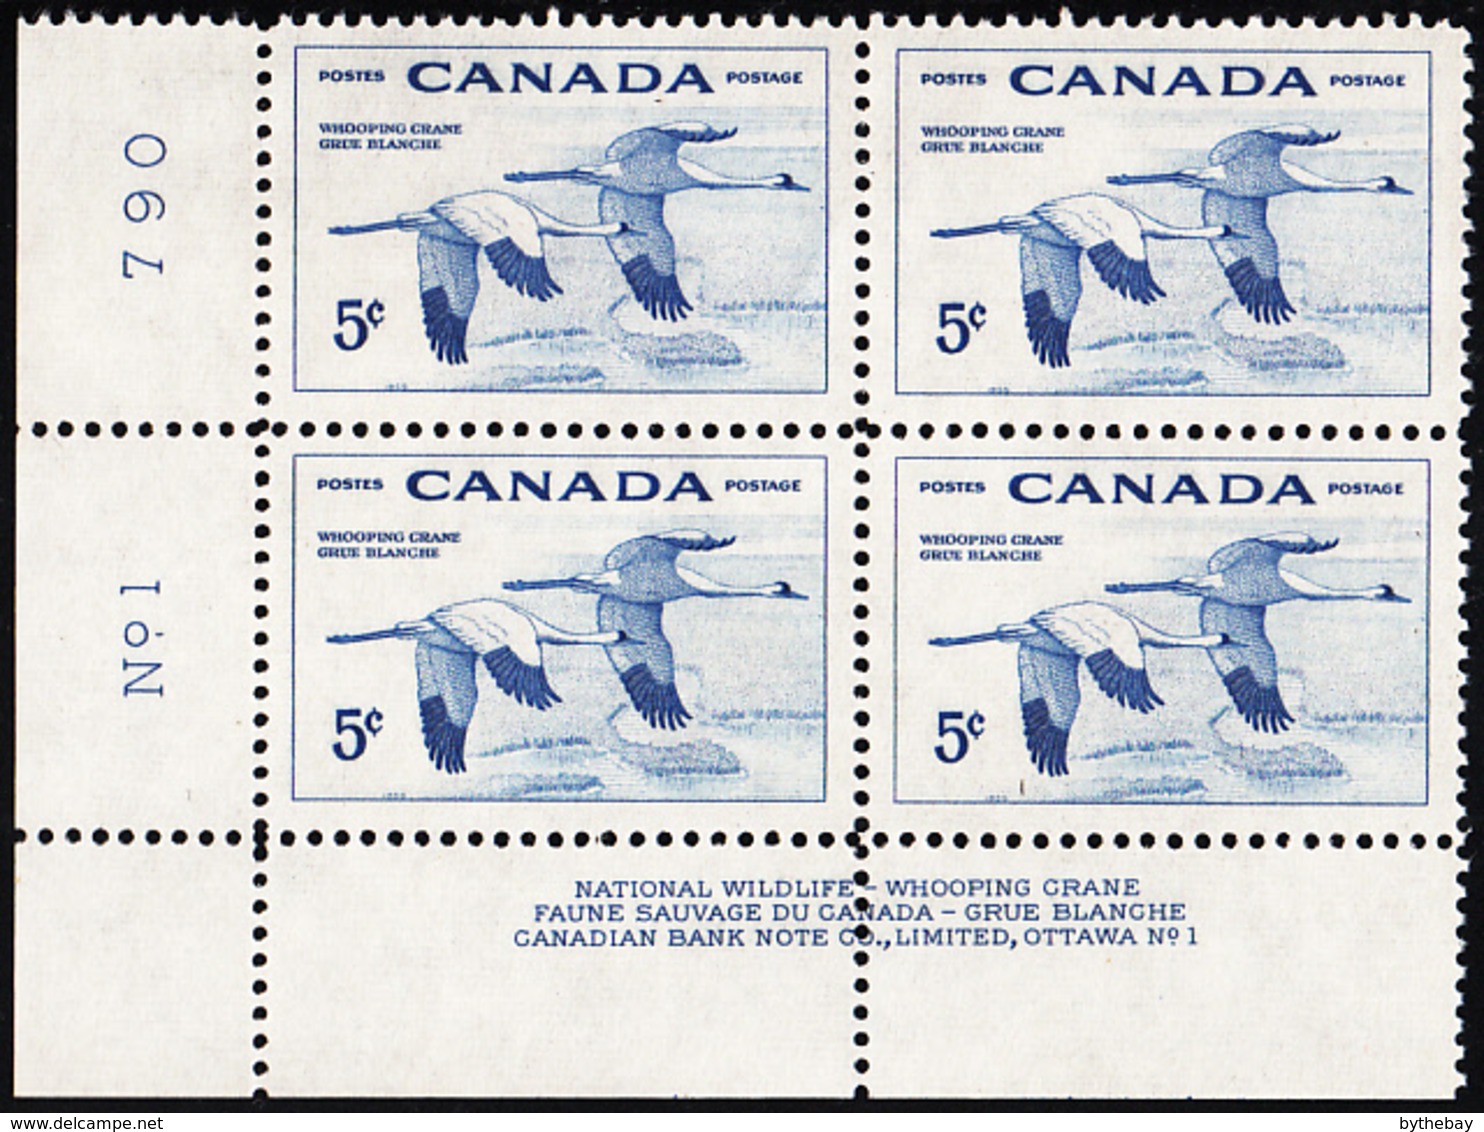 Canada 1955 MNH Sc #353 5c Whooping Cranes Plate #1 LL - Plate Number & Inscriptions